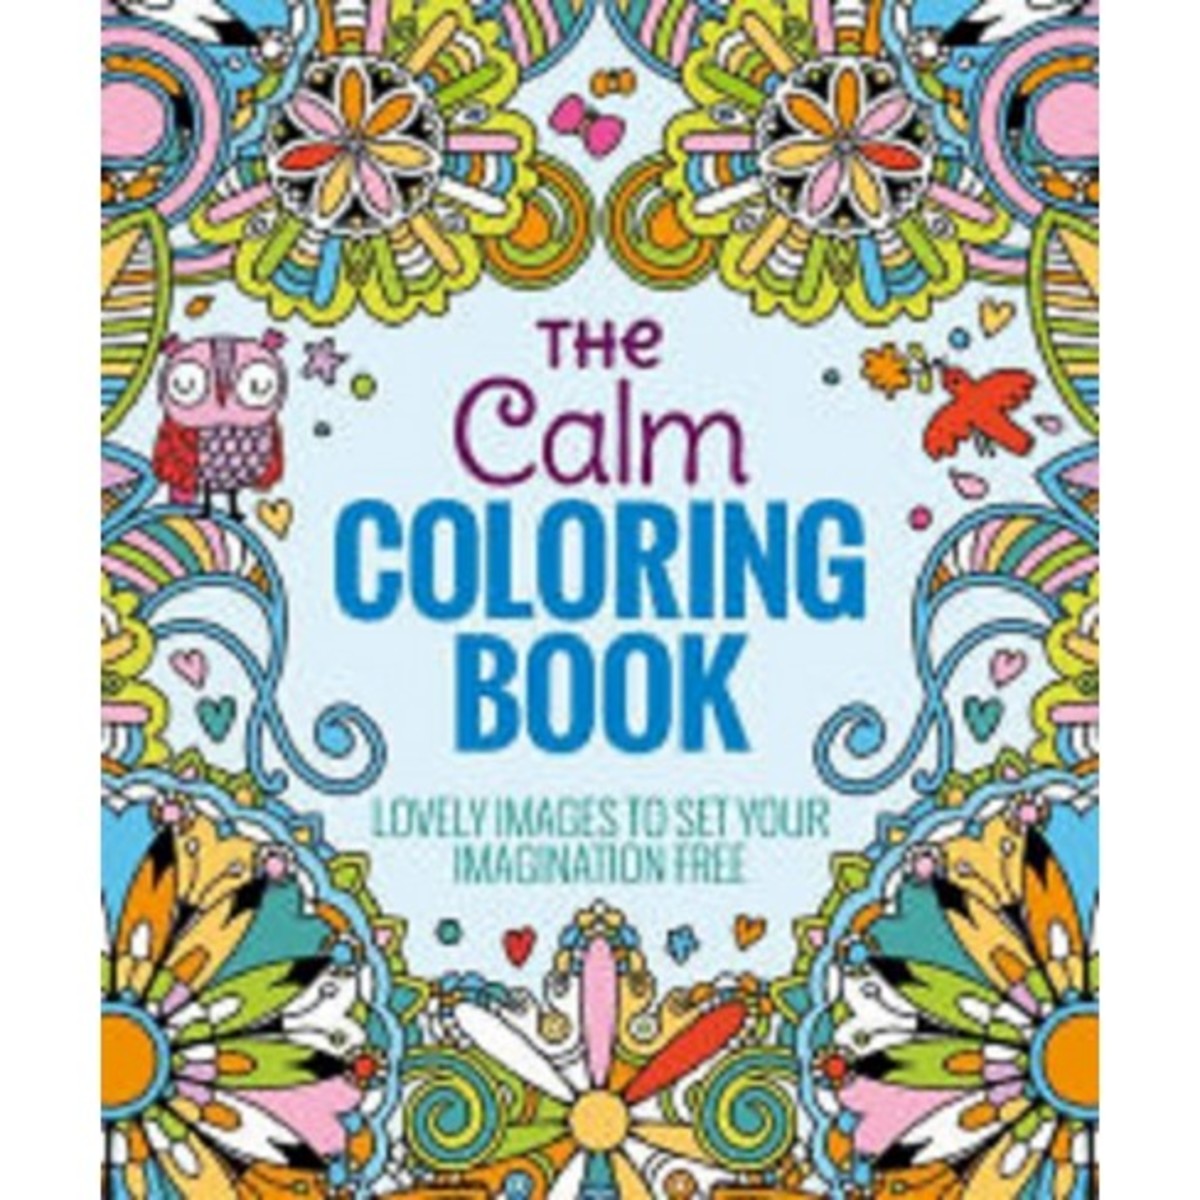 The combination of mental concentration and physical activity that is needed to work on adult coloring books can be very soothing for someone with PTSD. 